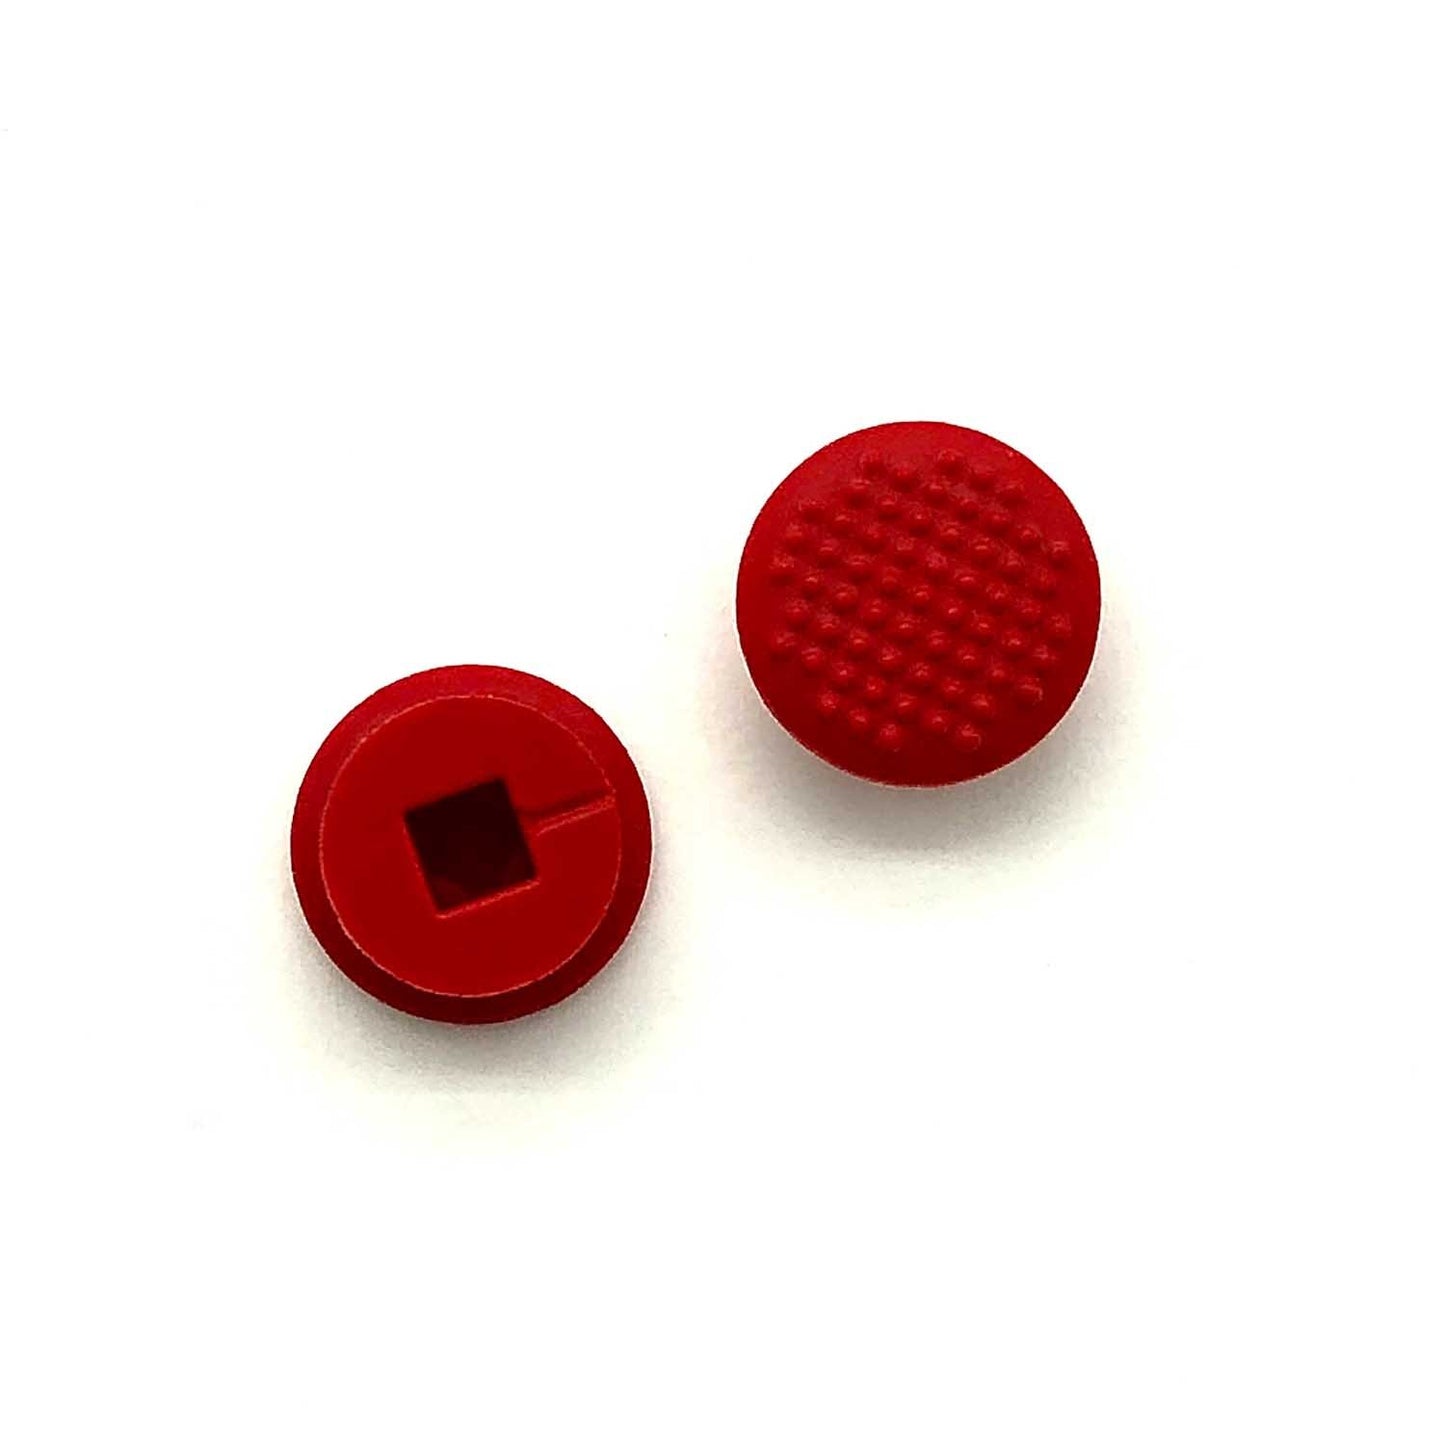 Caps for Lenovo "Super Low Profile" ThinkPad TrackPoint caps